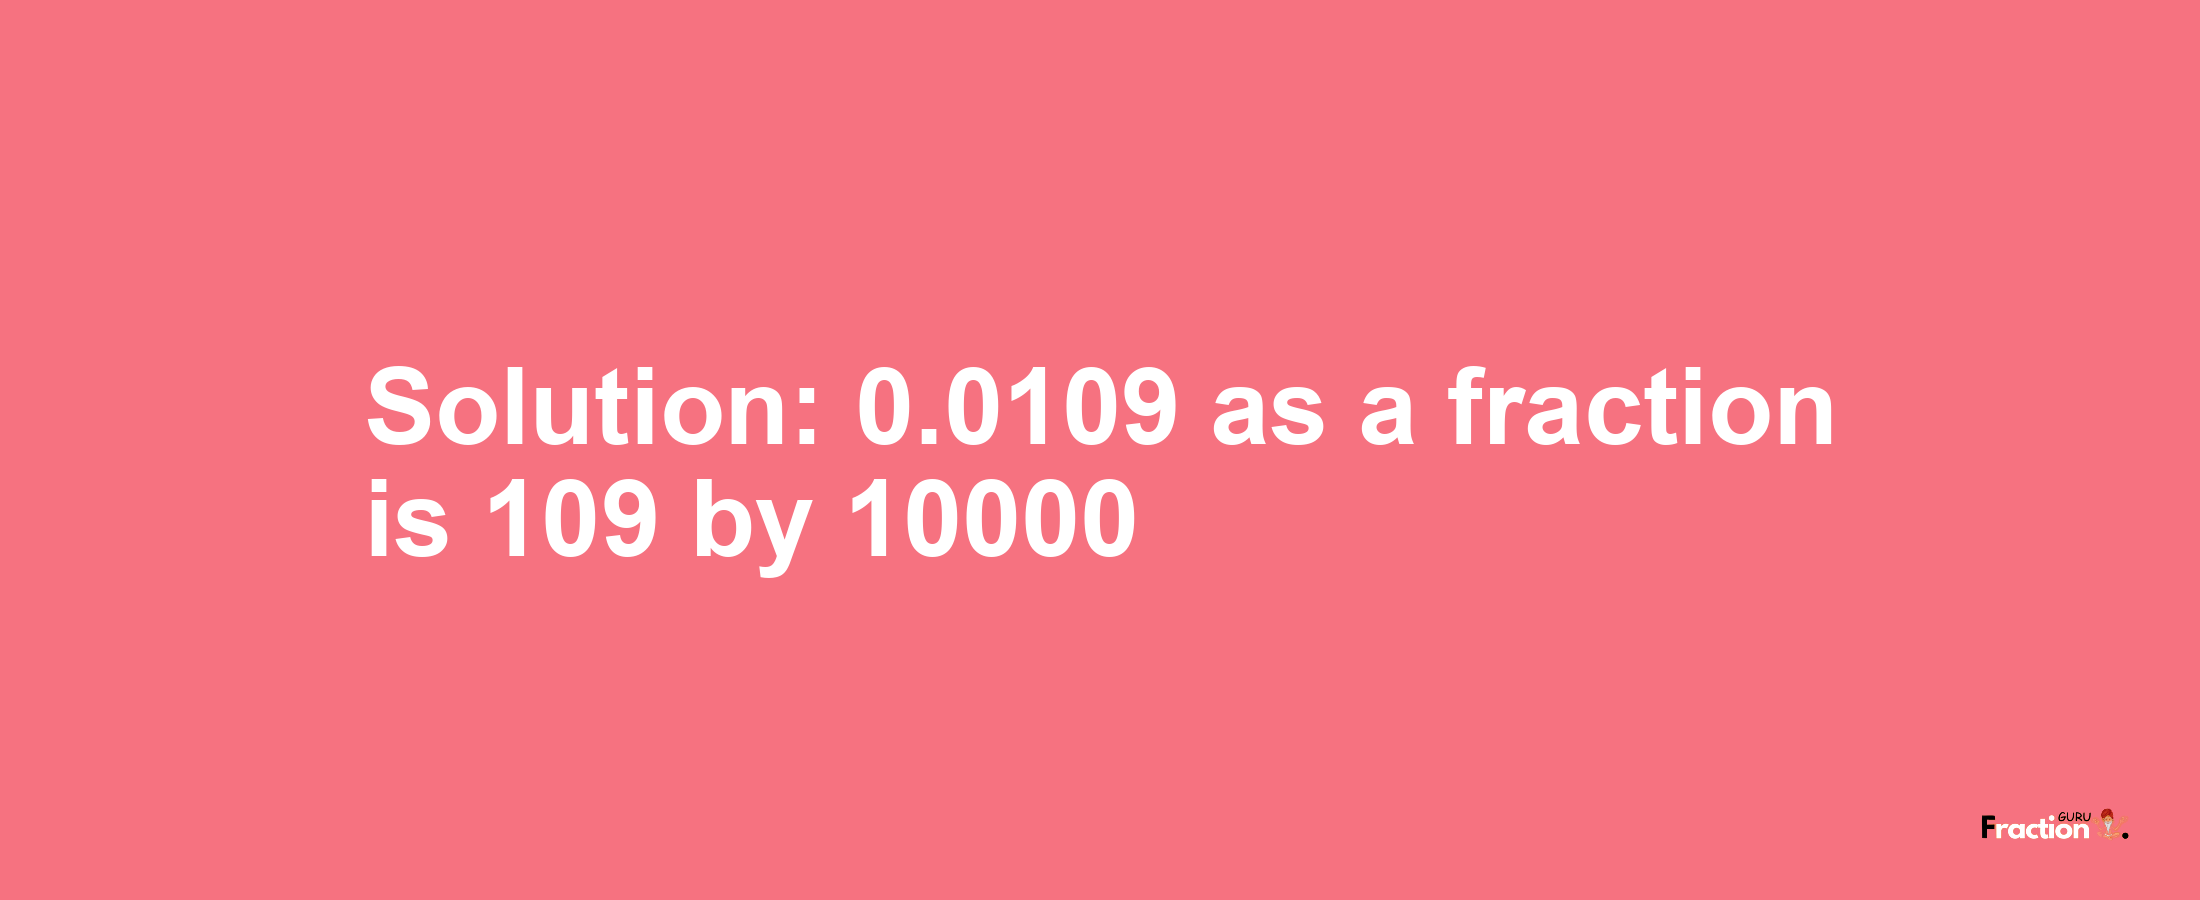 Solution:0.0109 as a fraction is 109/10000